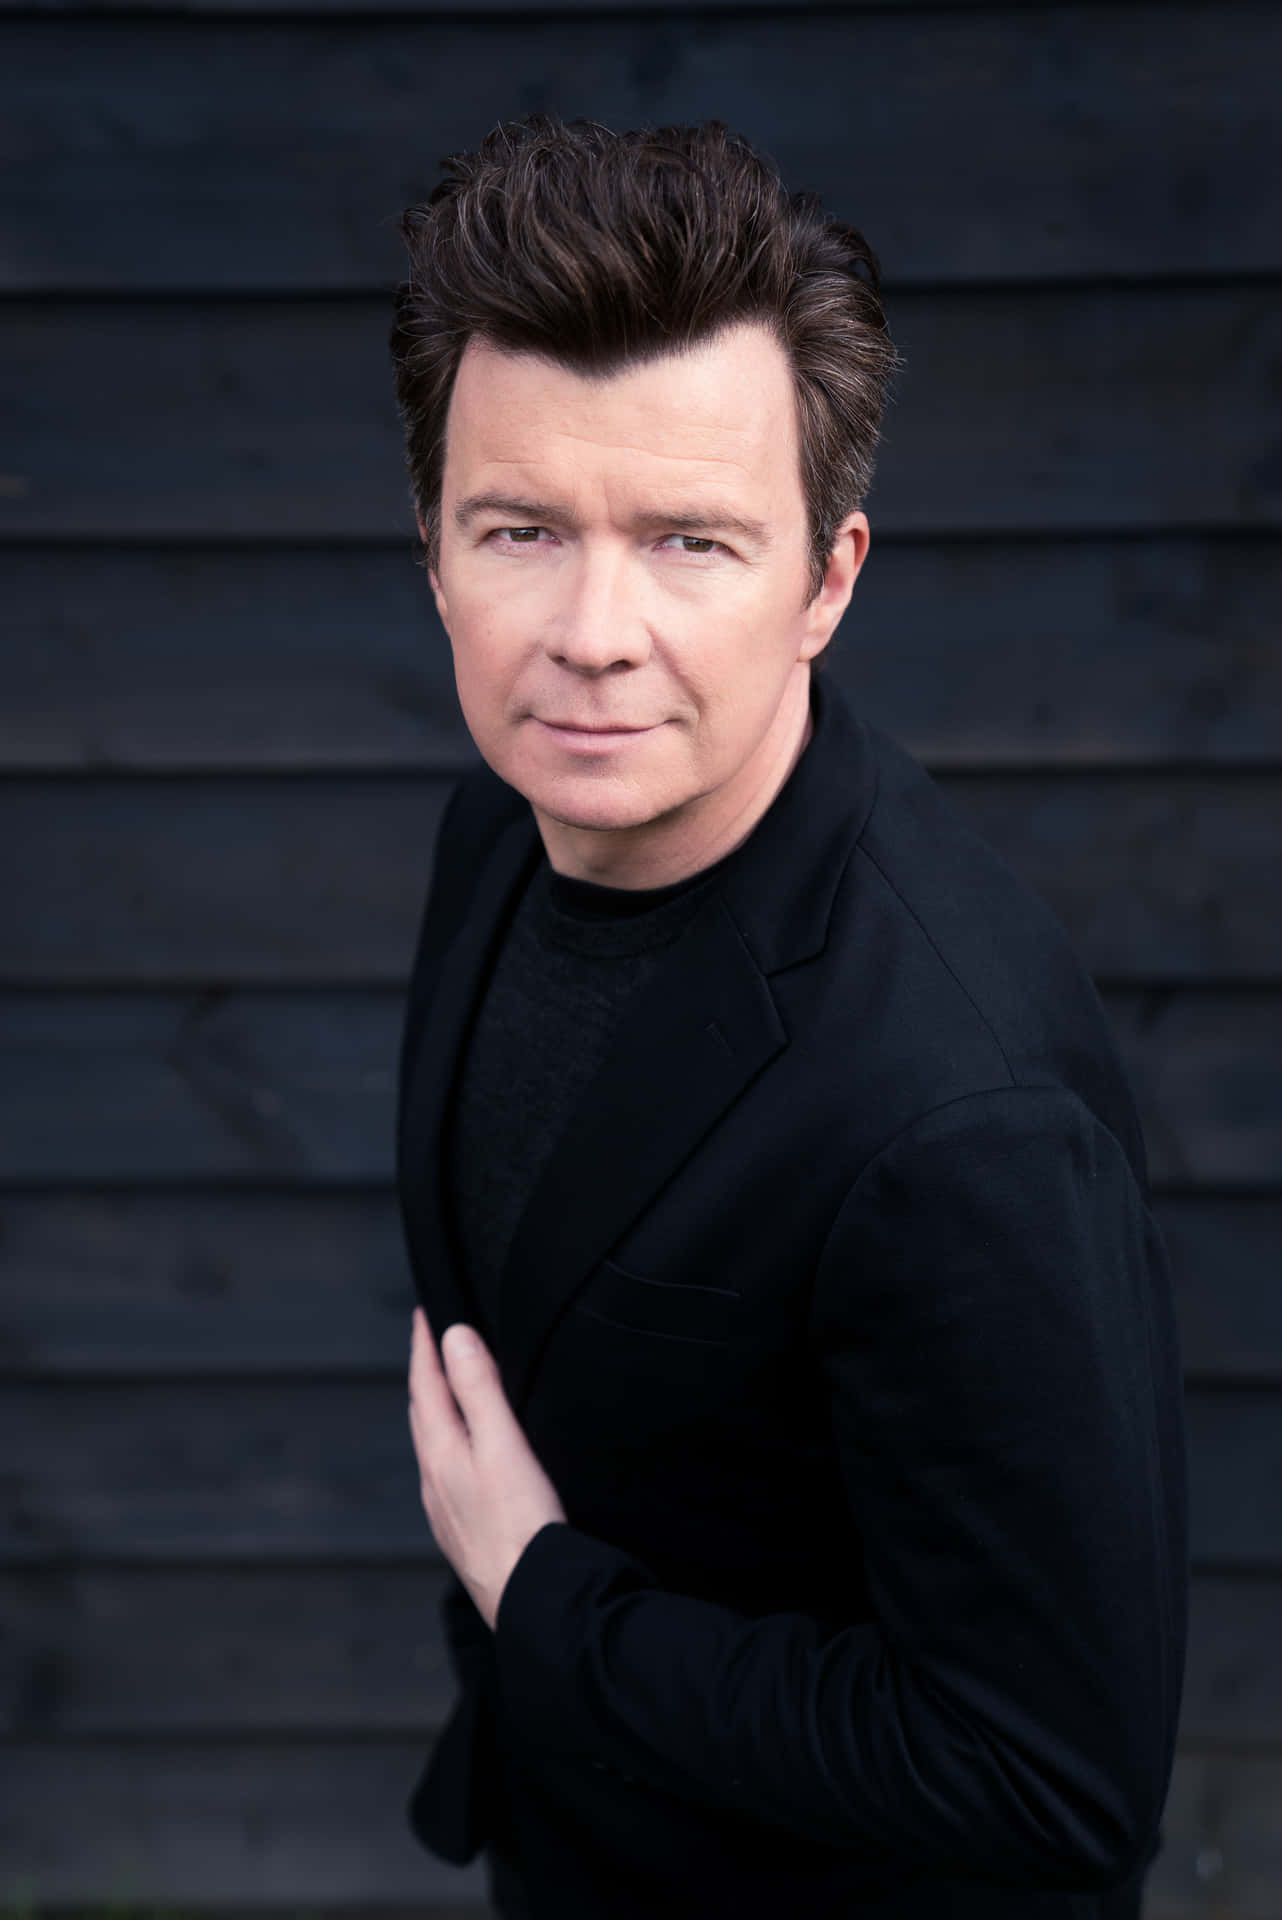 The pop star Rick Astley in his signature style. Wallpaper